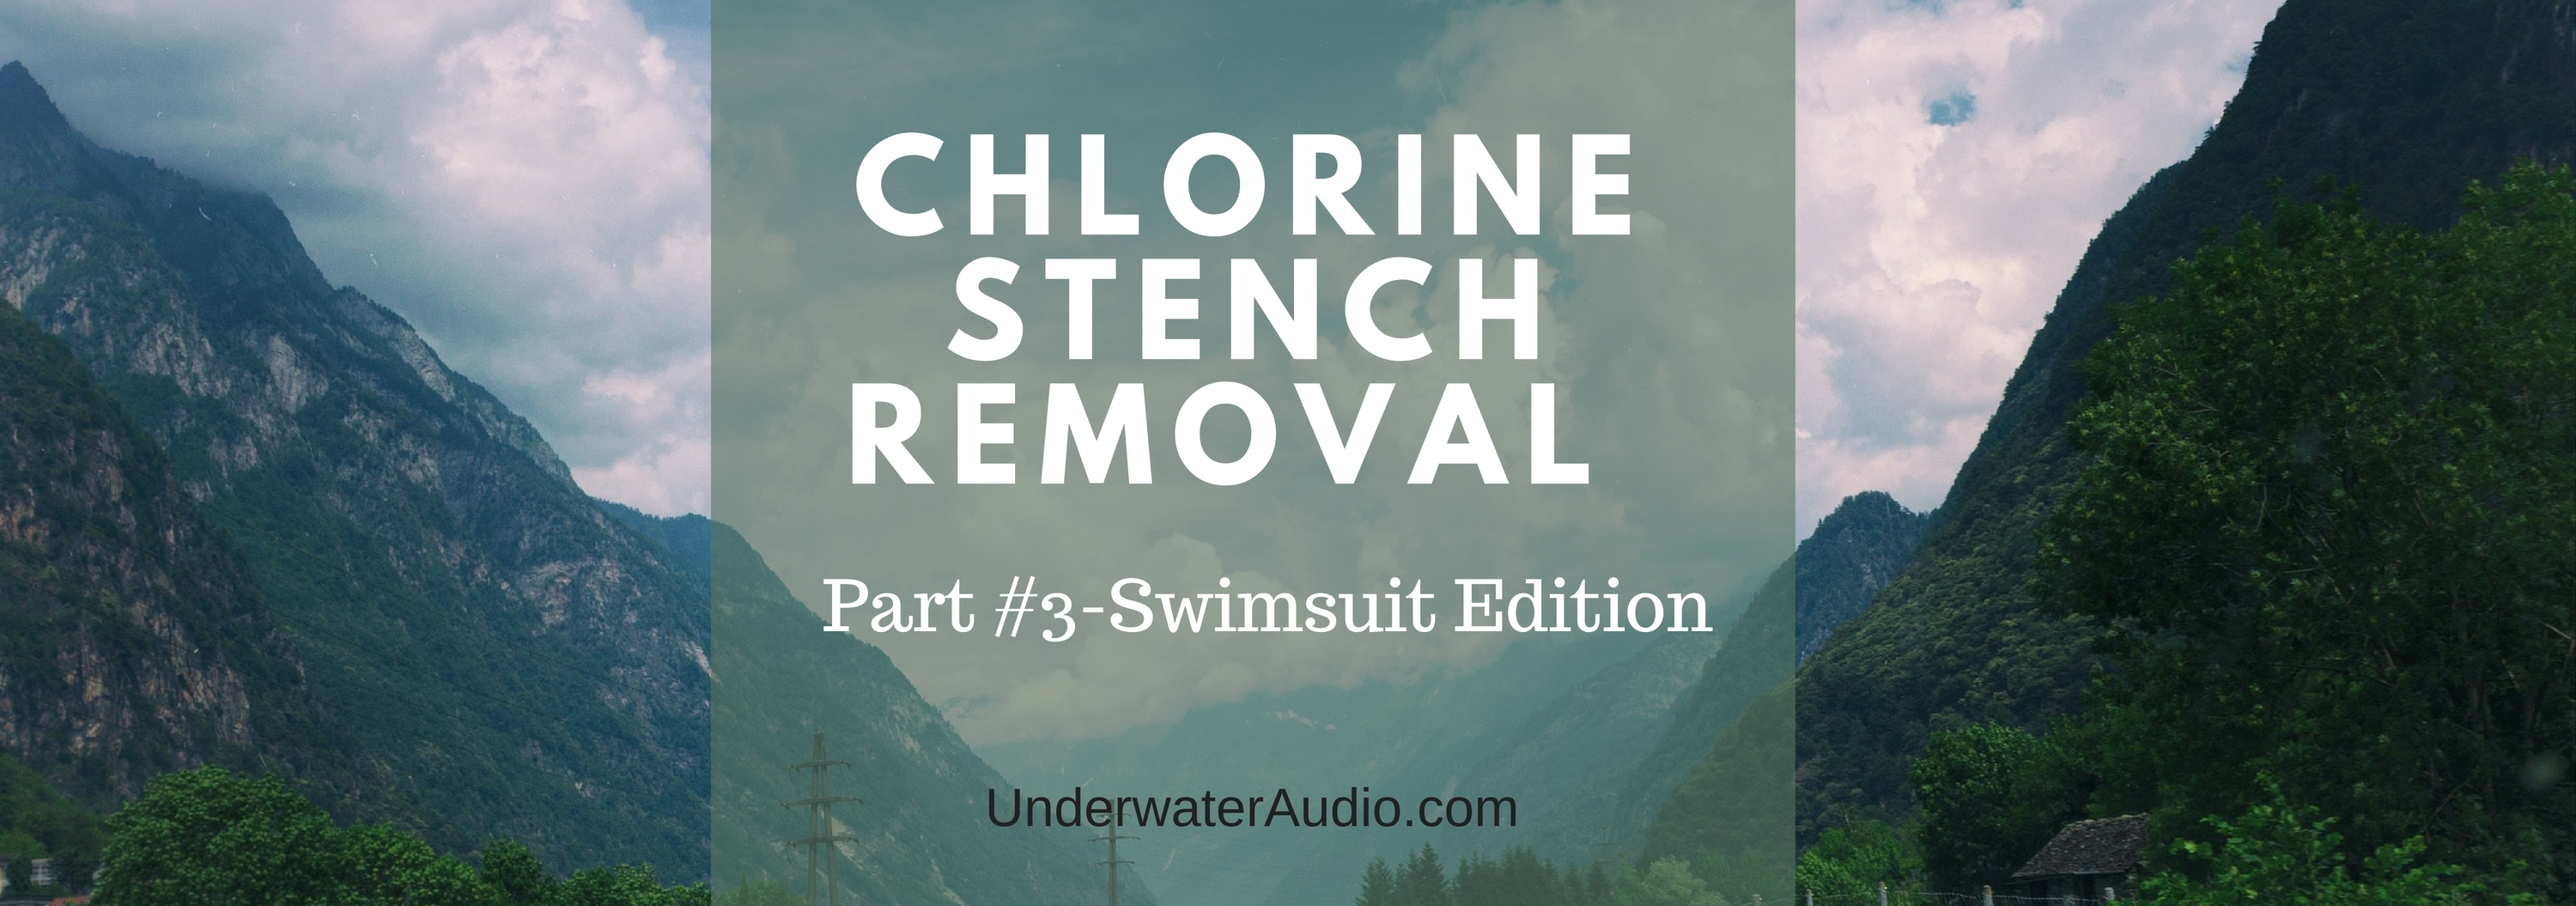 Chlorine Stench Removal Part #3-Swimsuit Edition